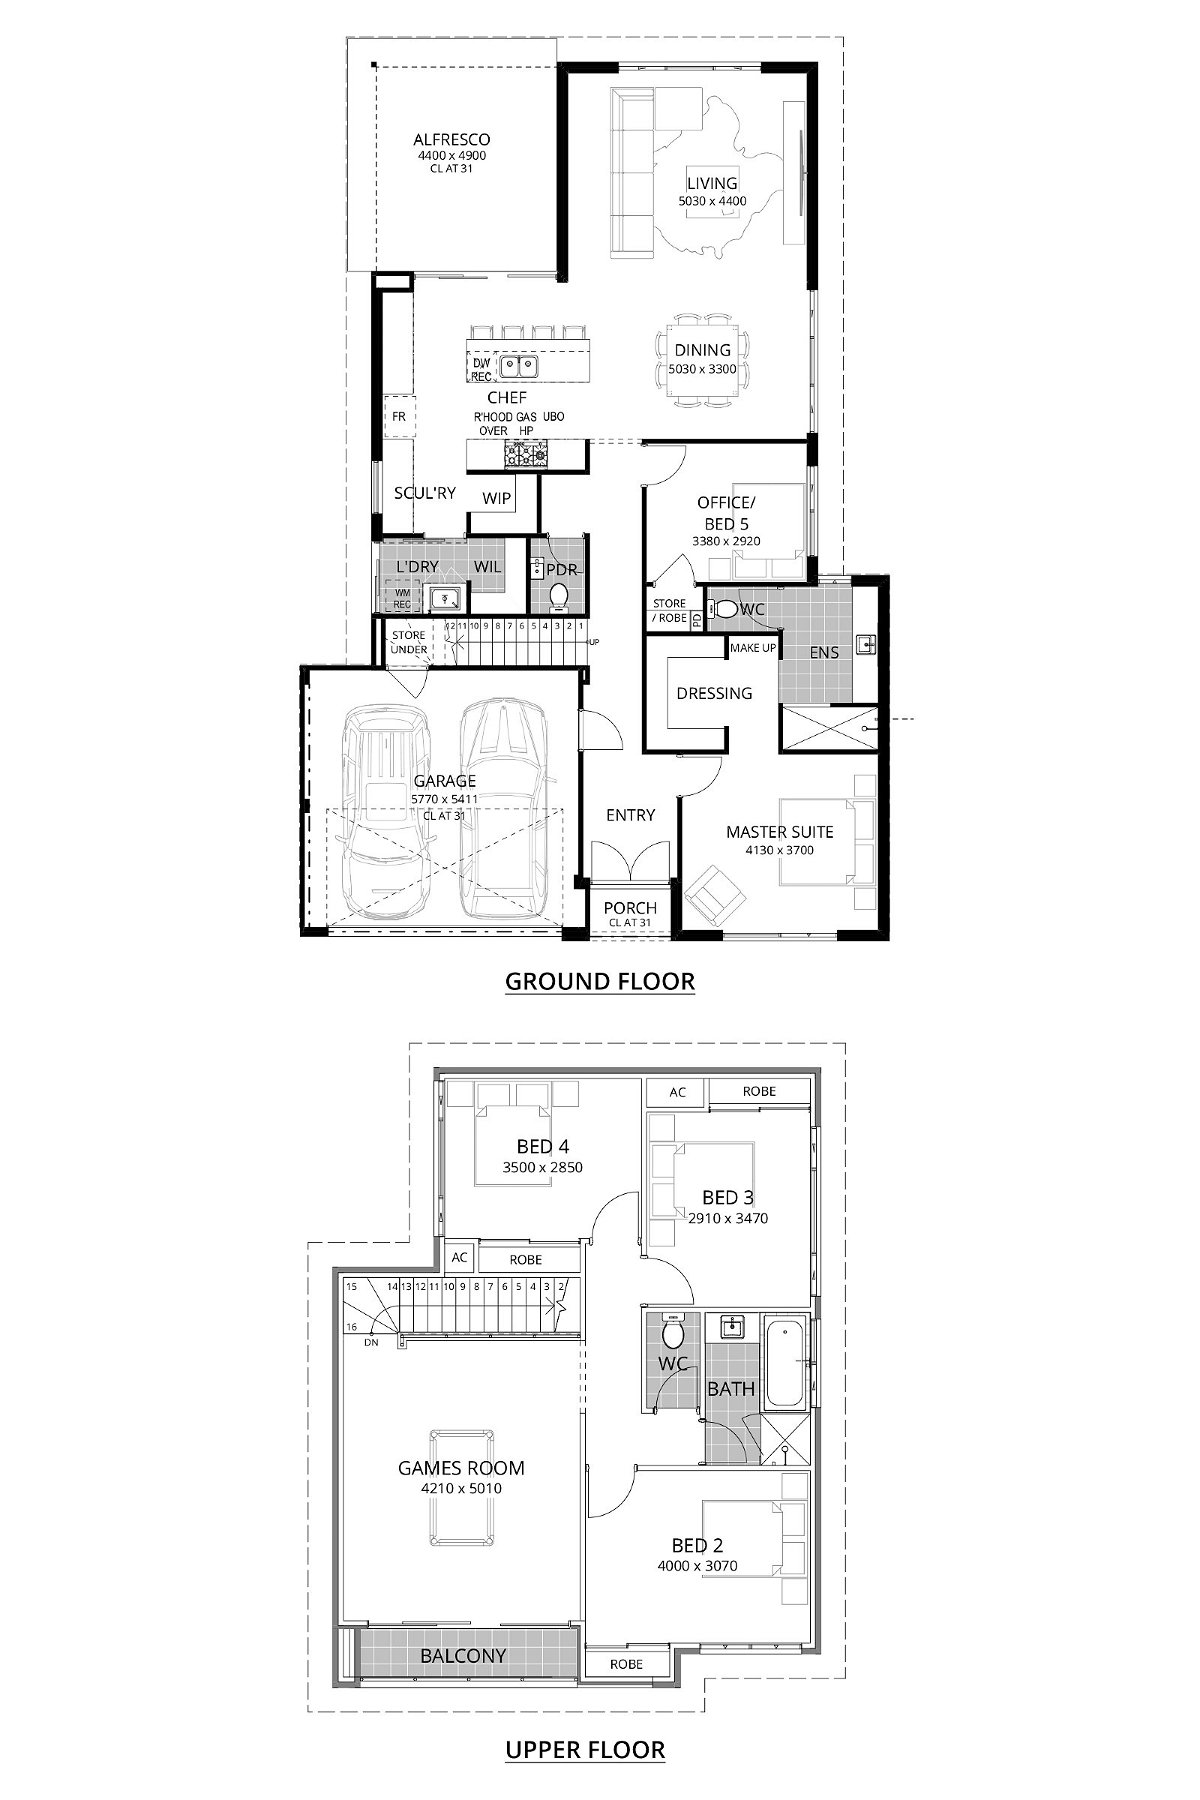 Residential Attitudes - Seventh Heaven | 4 Bed - Floorplan - Seventh Heaven Website Floorplan